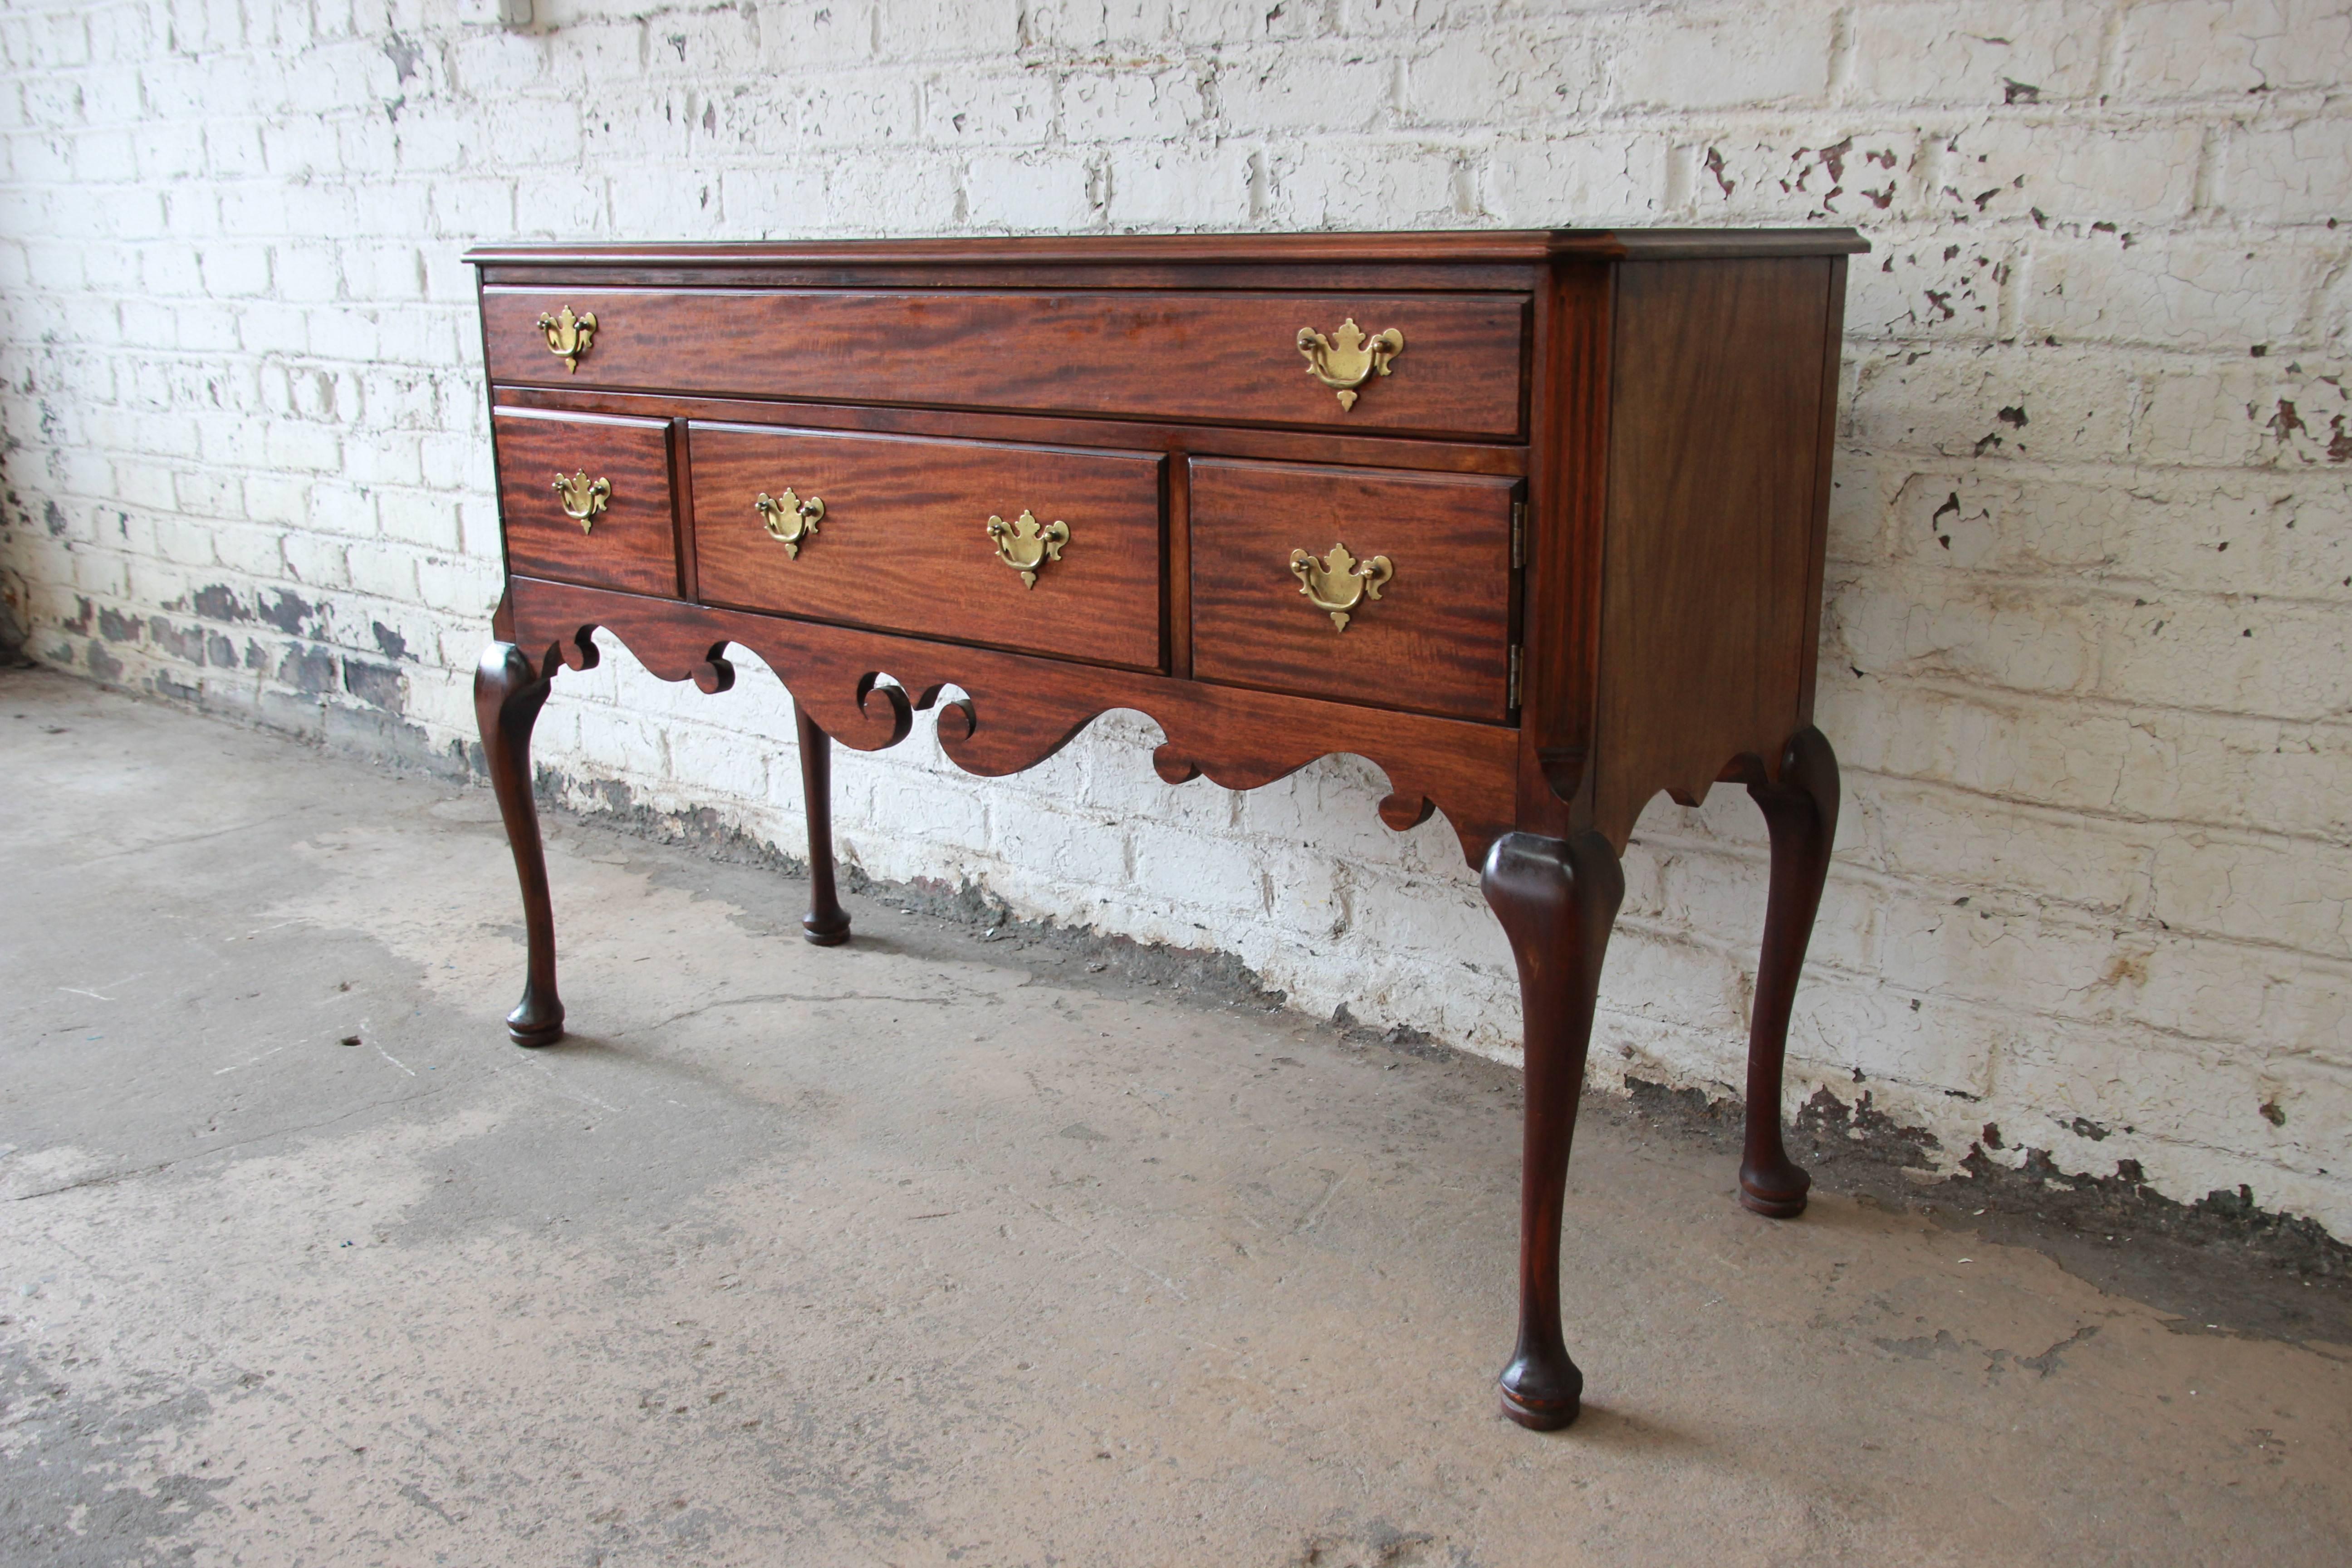 A beautiful Queen Anne style mahogany sideboard or server by Baker Furniture Company. The sideboard features gorgeous mahogany wood grain and a nice traditional Queen Anne style. It offers ample room for storage, with two dovetailed drawers and two